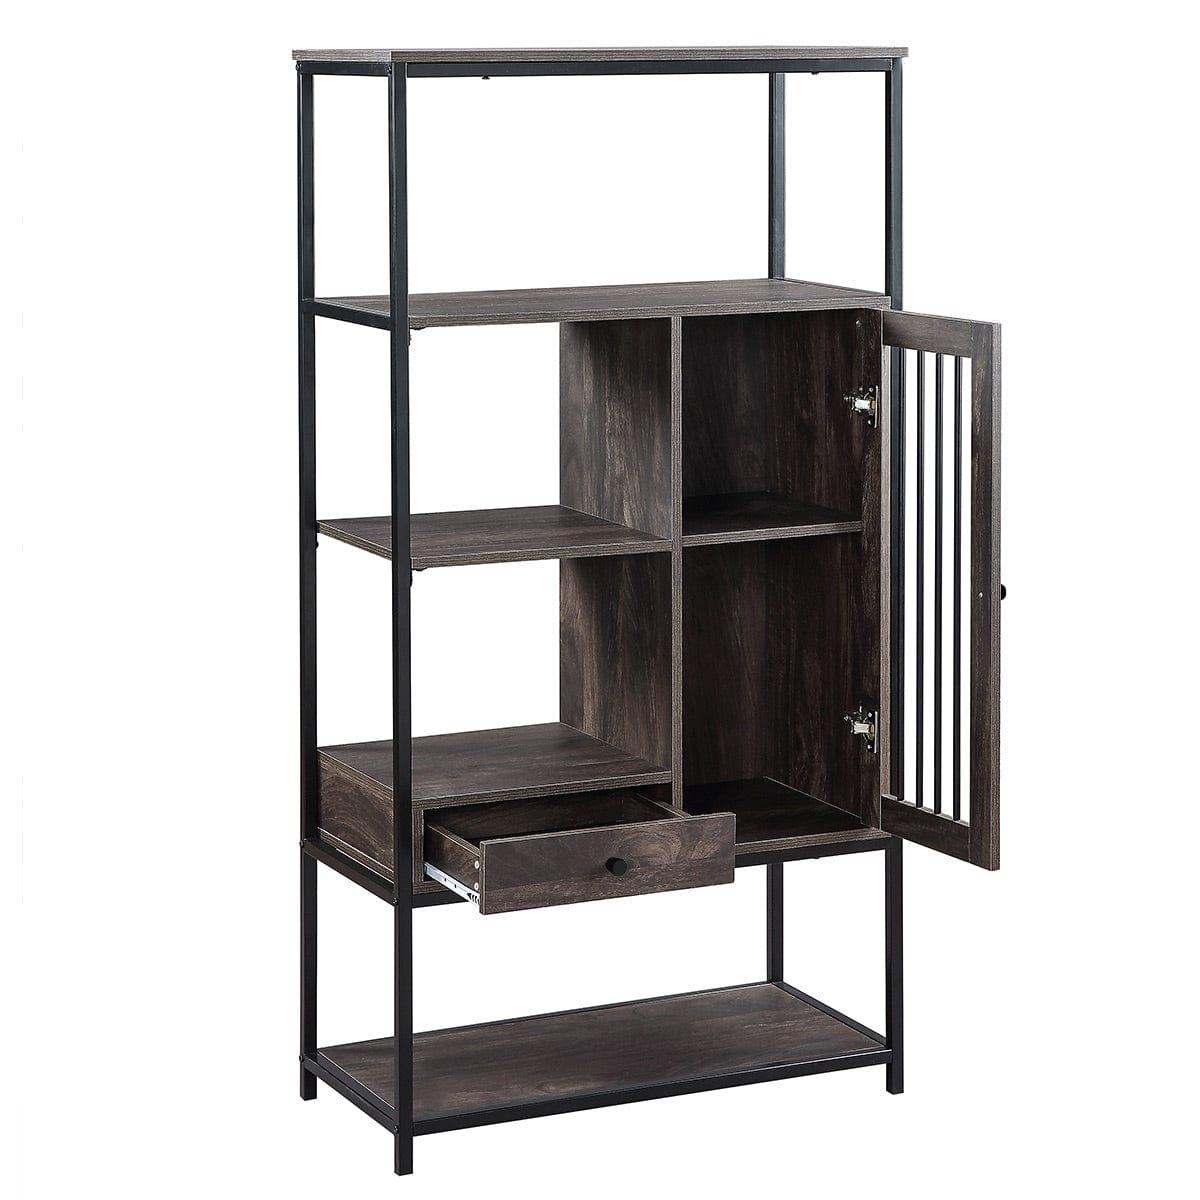 Shop Home Office Bookcase and Bookshelf 5 Tier Display Shelf with Doors and Drawers, Freestanding Multi-functional Decorative Storage Shelving, Vintage Brown Industrial Style (Brown) Mademoiselle Home Decor